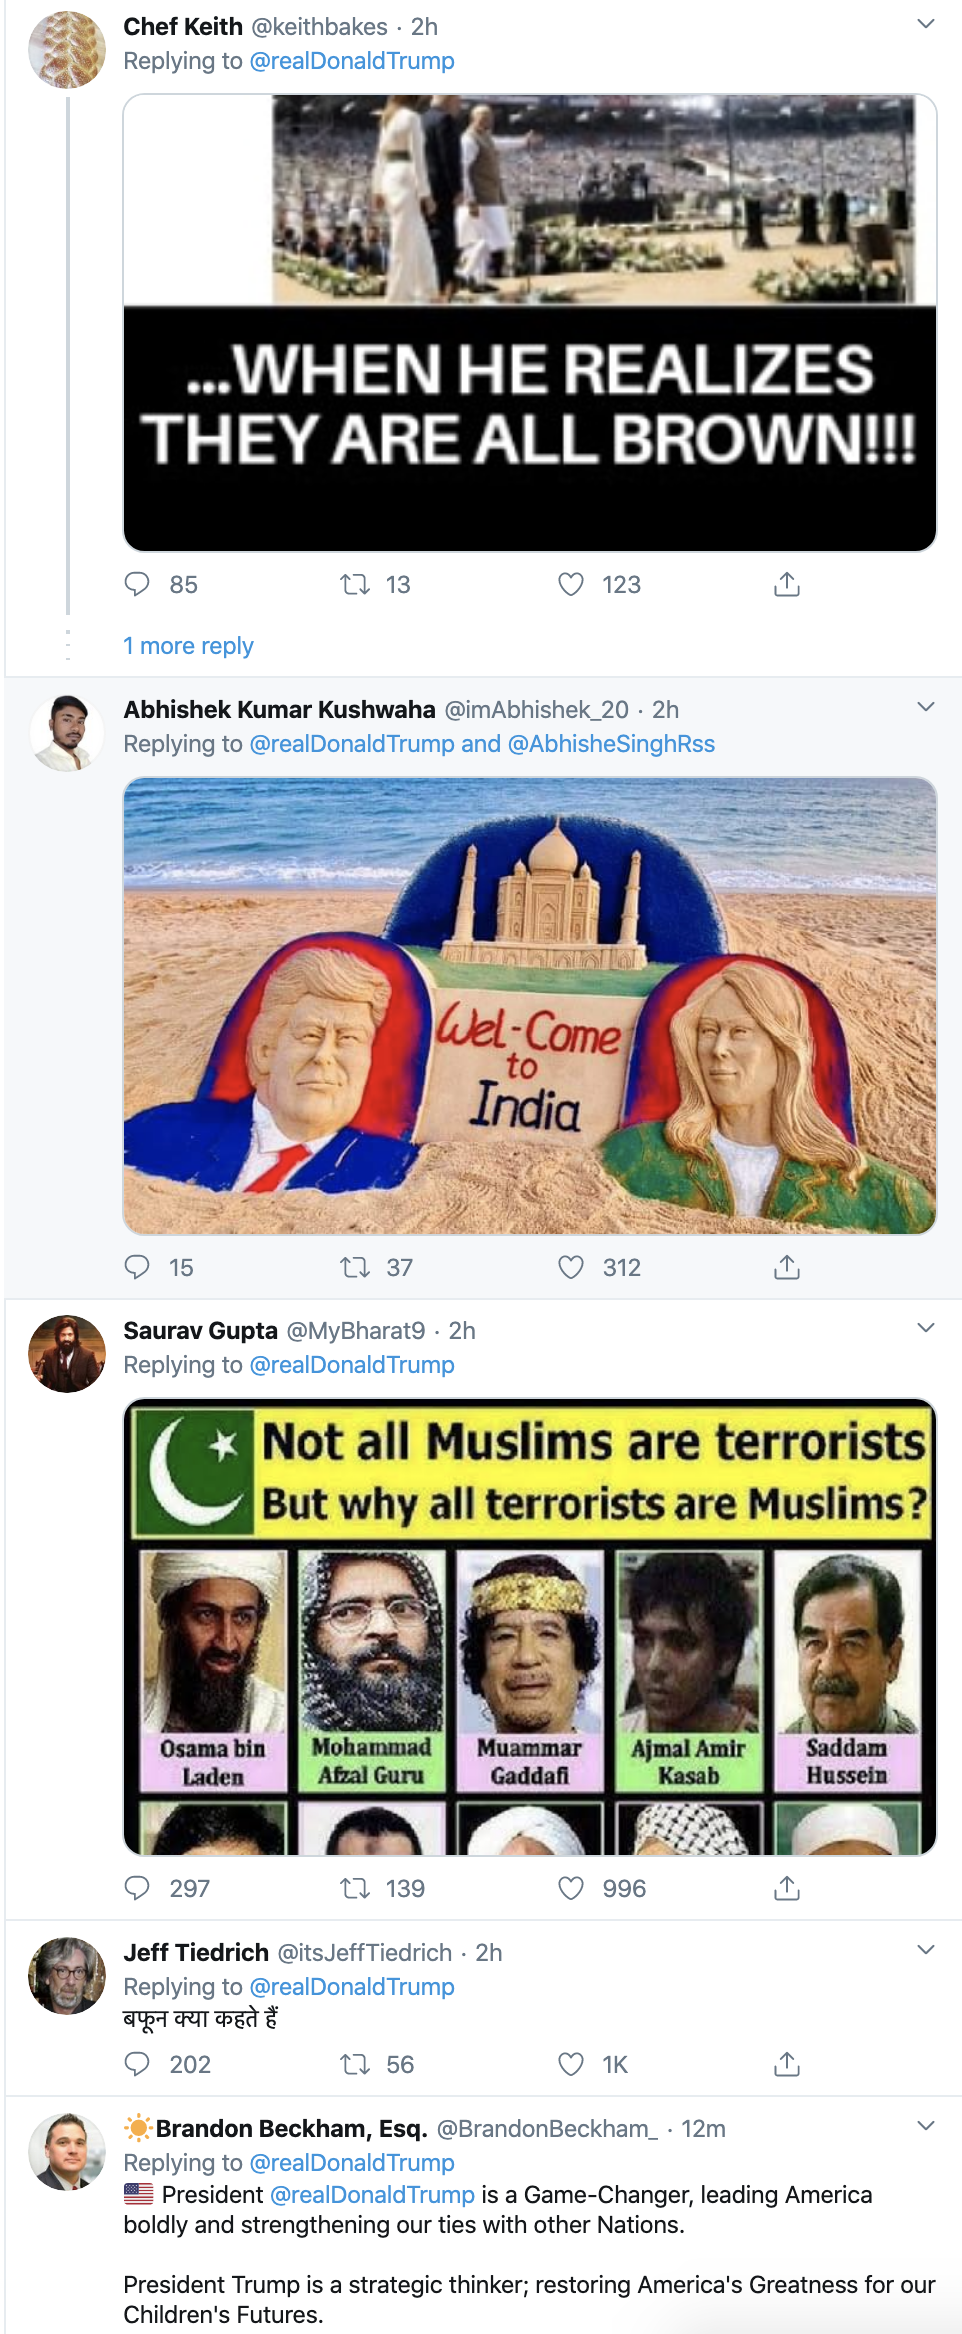 Screen-Shot-2020-02-24-at-7.18.49-AM Trump Tweets Arrival In India & Gets Mocked Online Donald Trump Featured Foreign Policy Politics Top Stories 